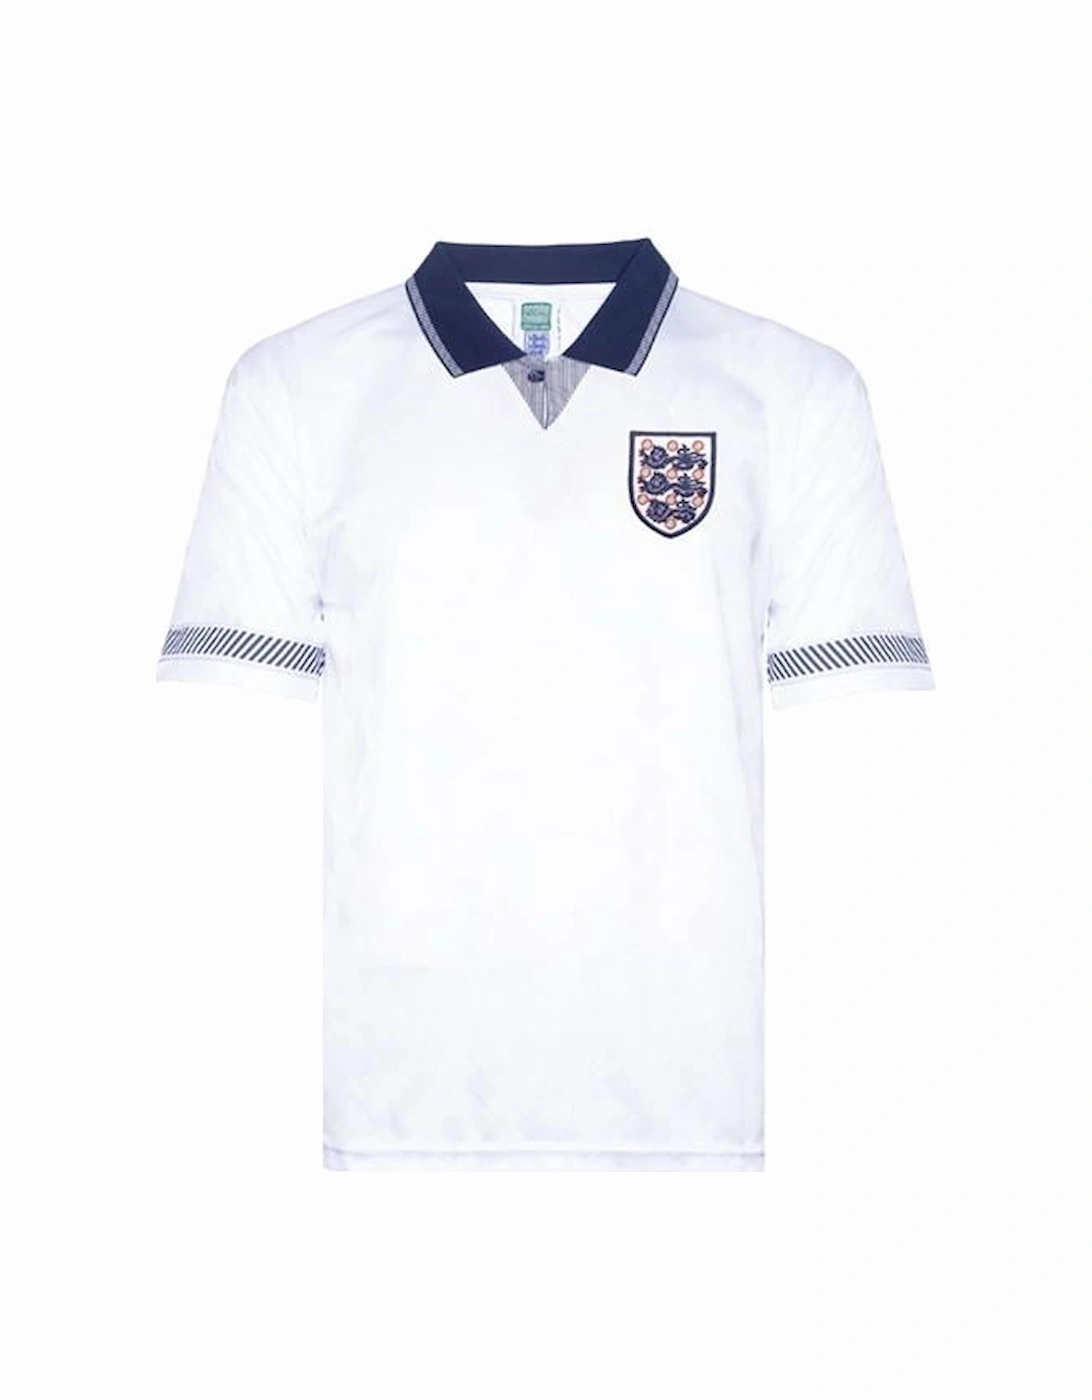 Mens England 1990 Home Jersey, 2 of 1